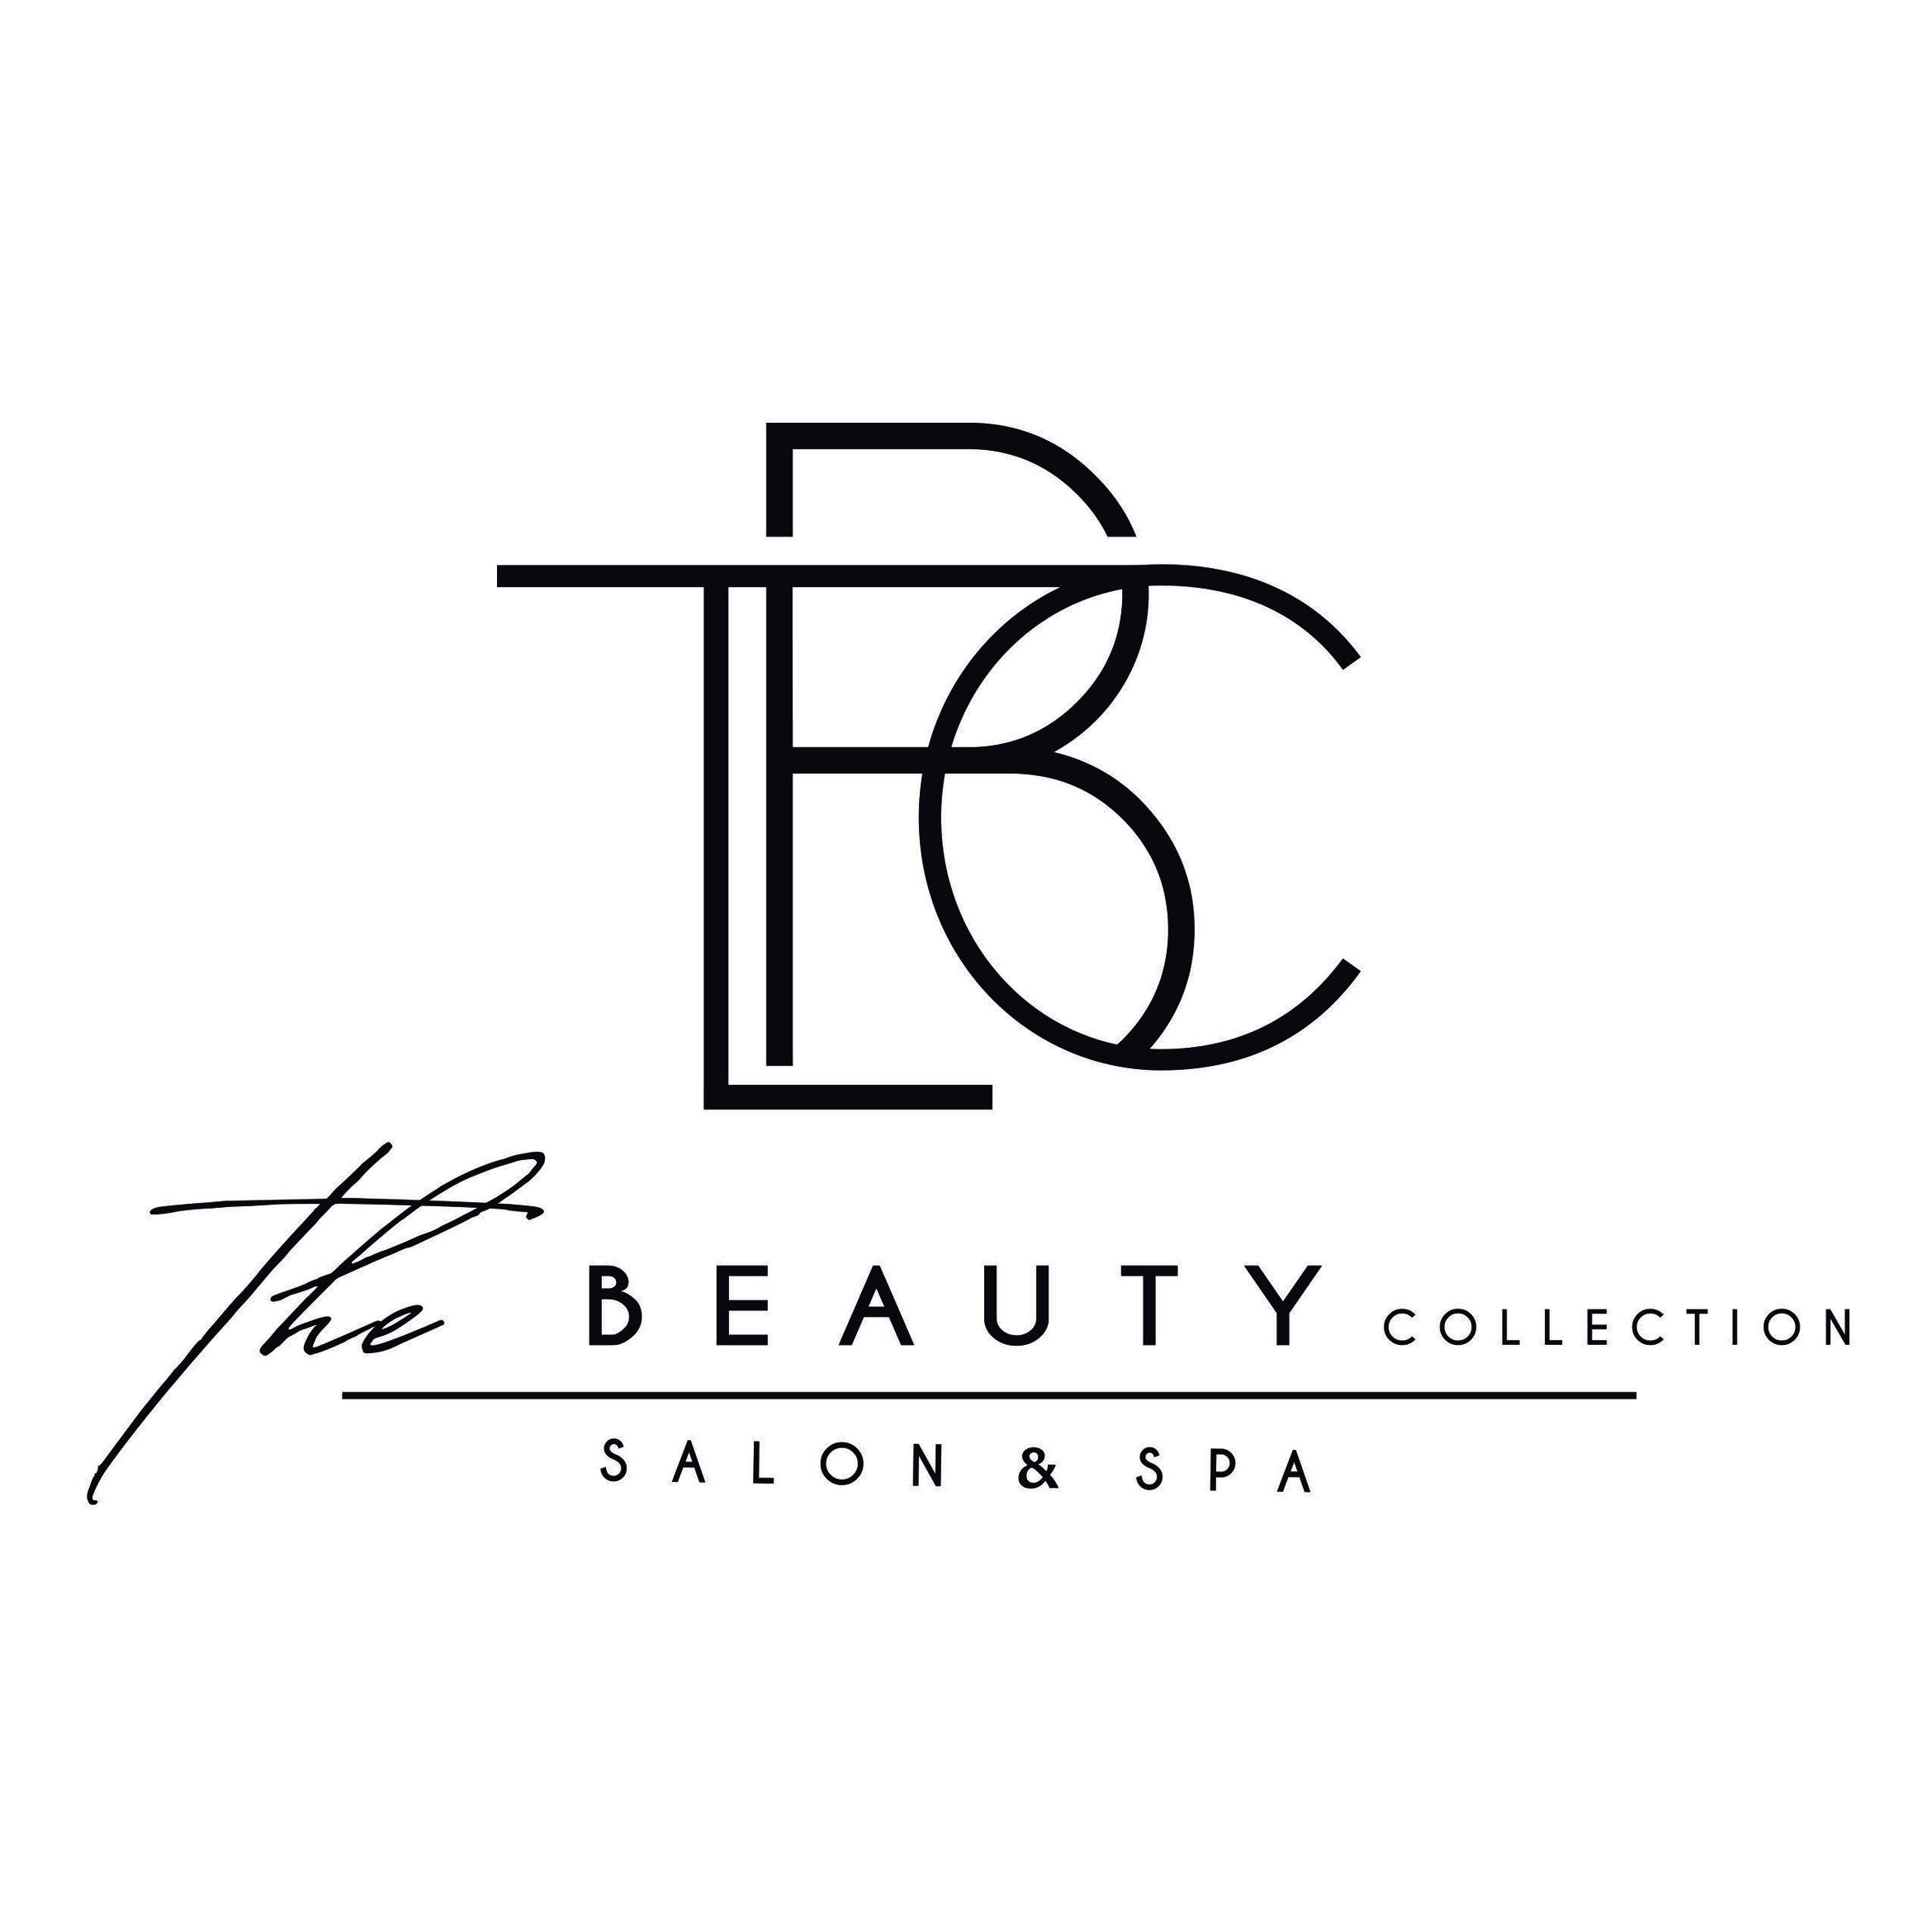 THE BEAUTY COLLECTION SALON & SPA, 13871 W Hillsborough Ave, Tampa, 33635